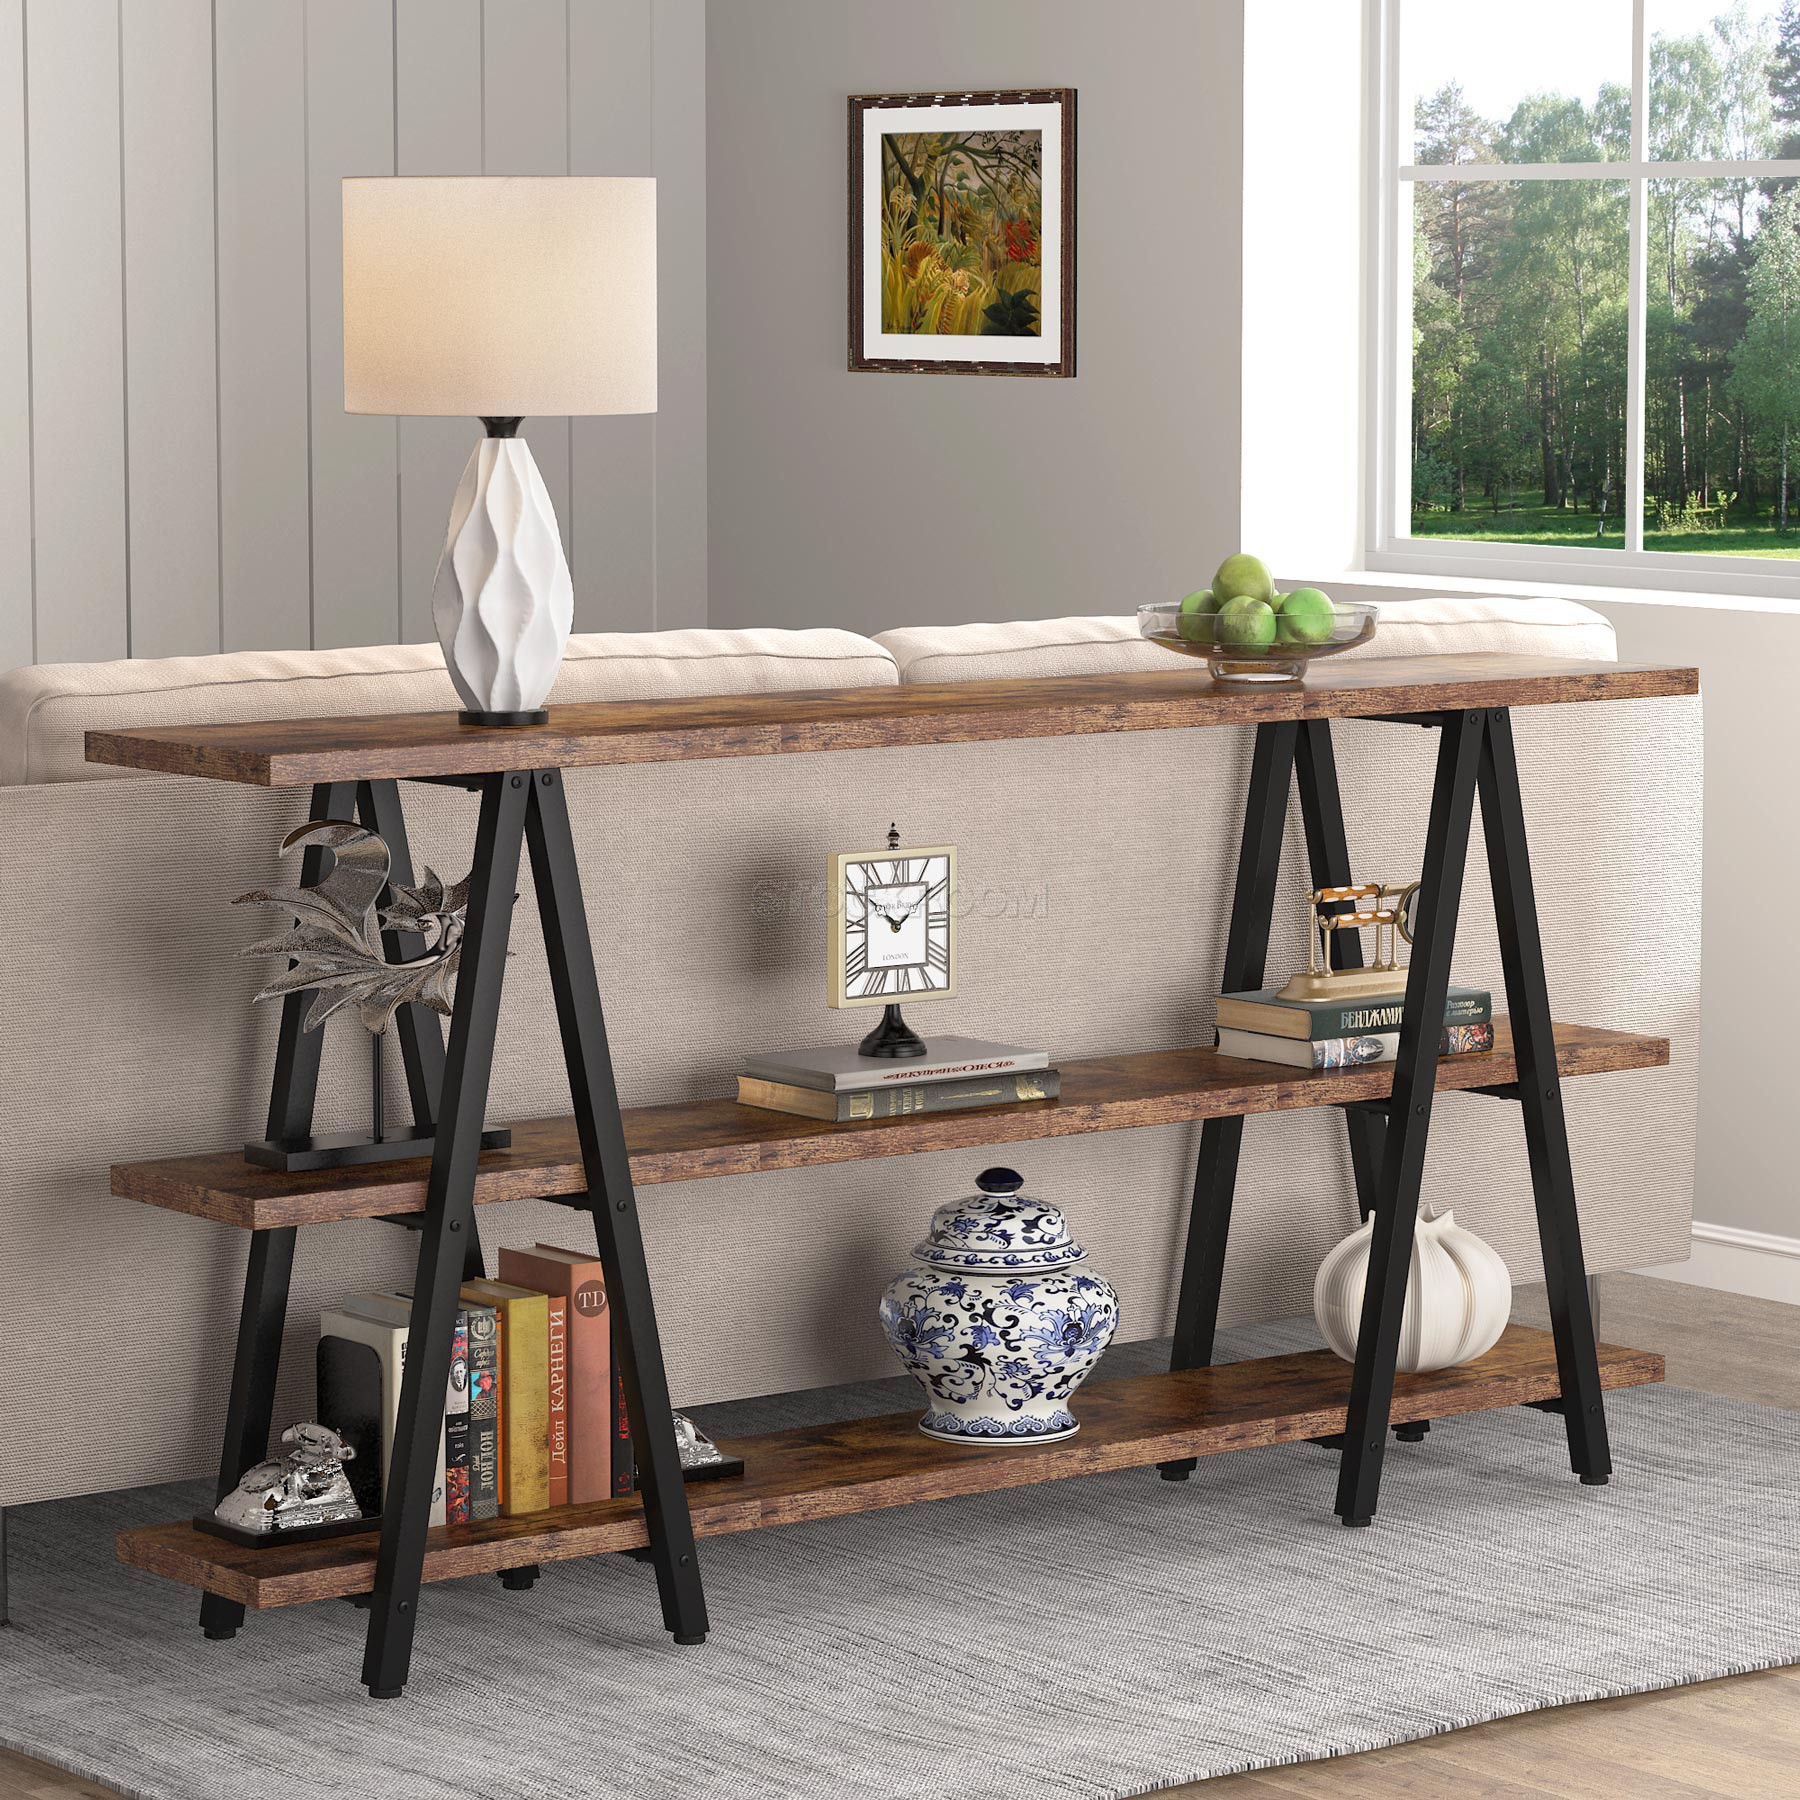 Aiden Industrial Loft Reclaimed Solid Wood console shelves by Stockroom